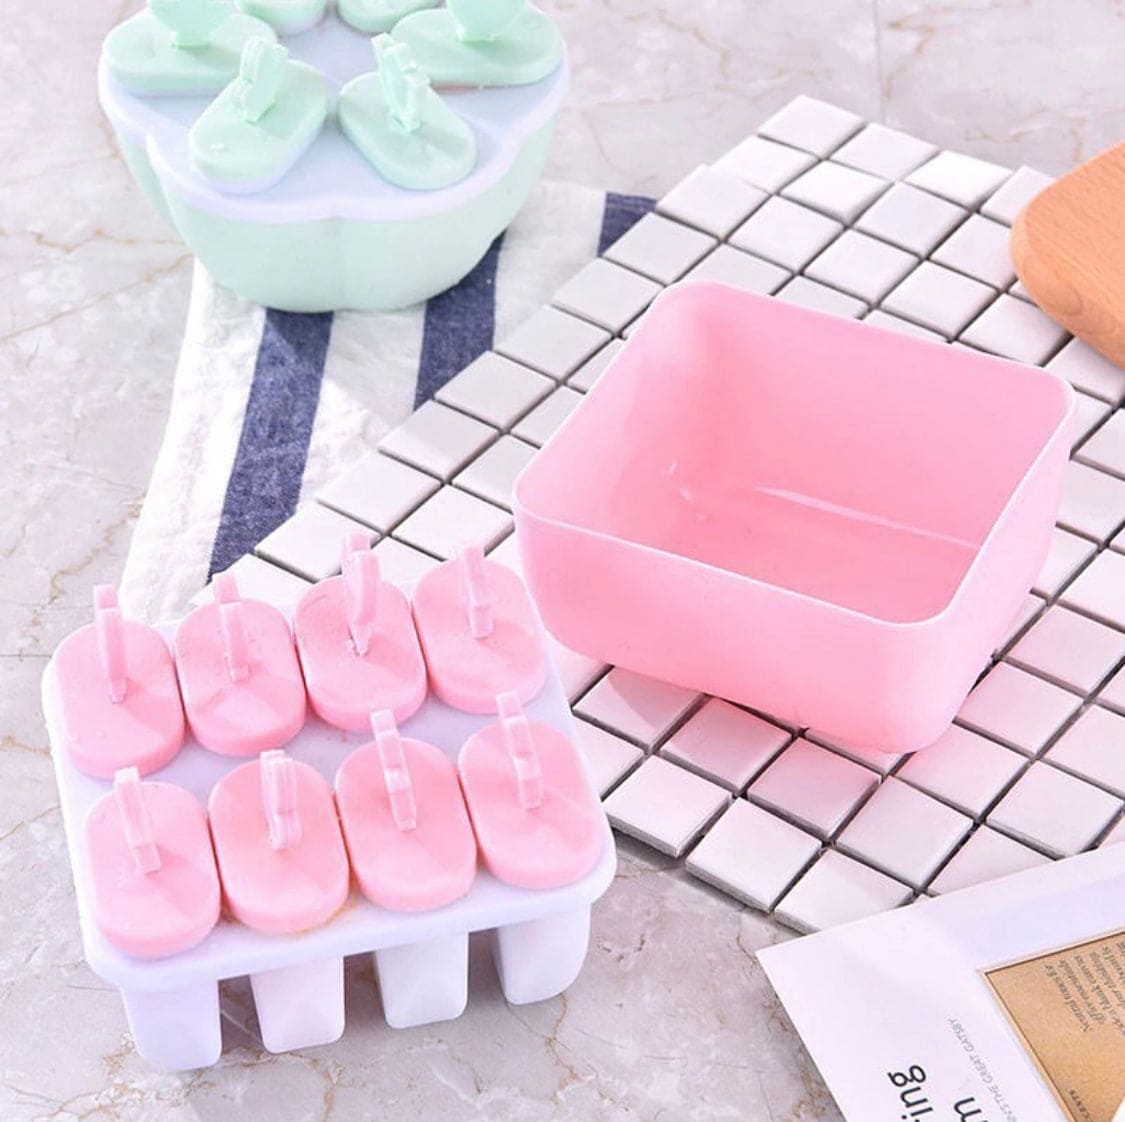 8 In 1 Silicon Icecream Molds, Popsicles Chocolate Ice Cube Tray, Food Safe Popsicles Maker, Homemade Freezer Ice Lolly Mold